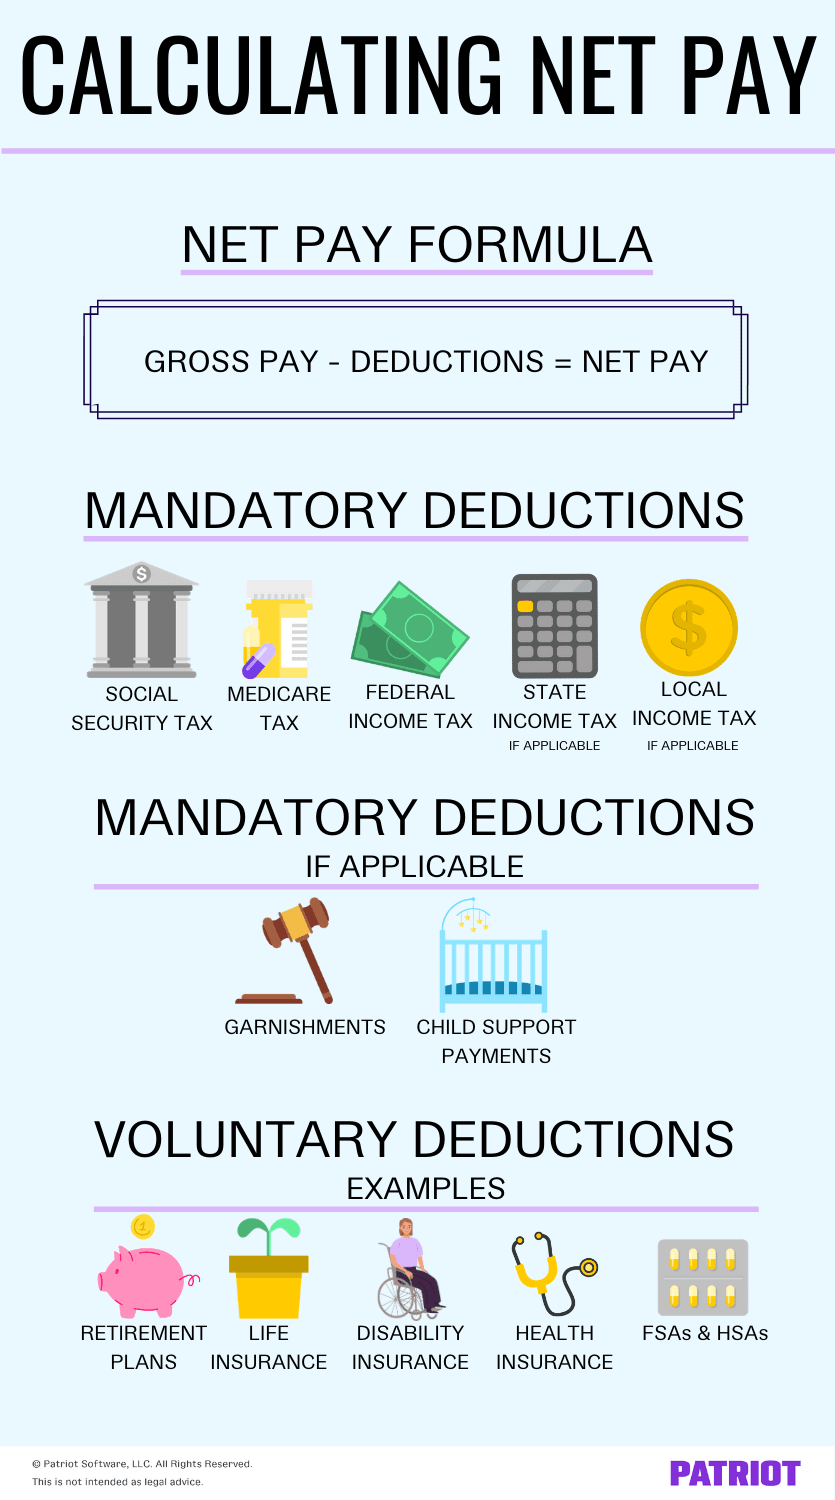 calculating net pay, including formula and types of deductions